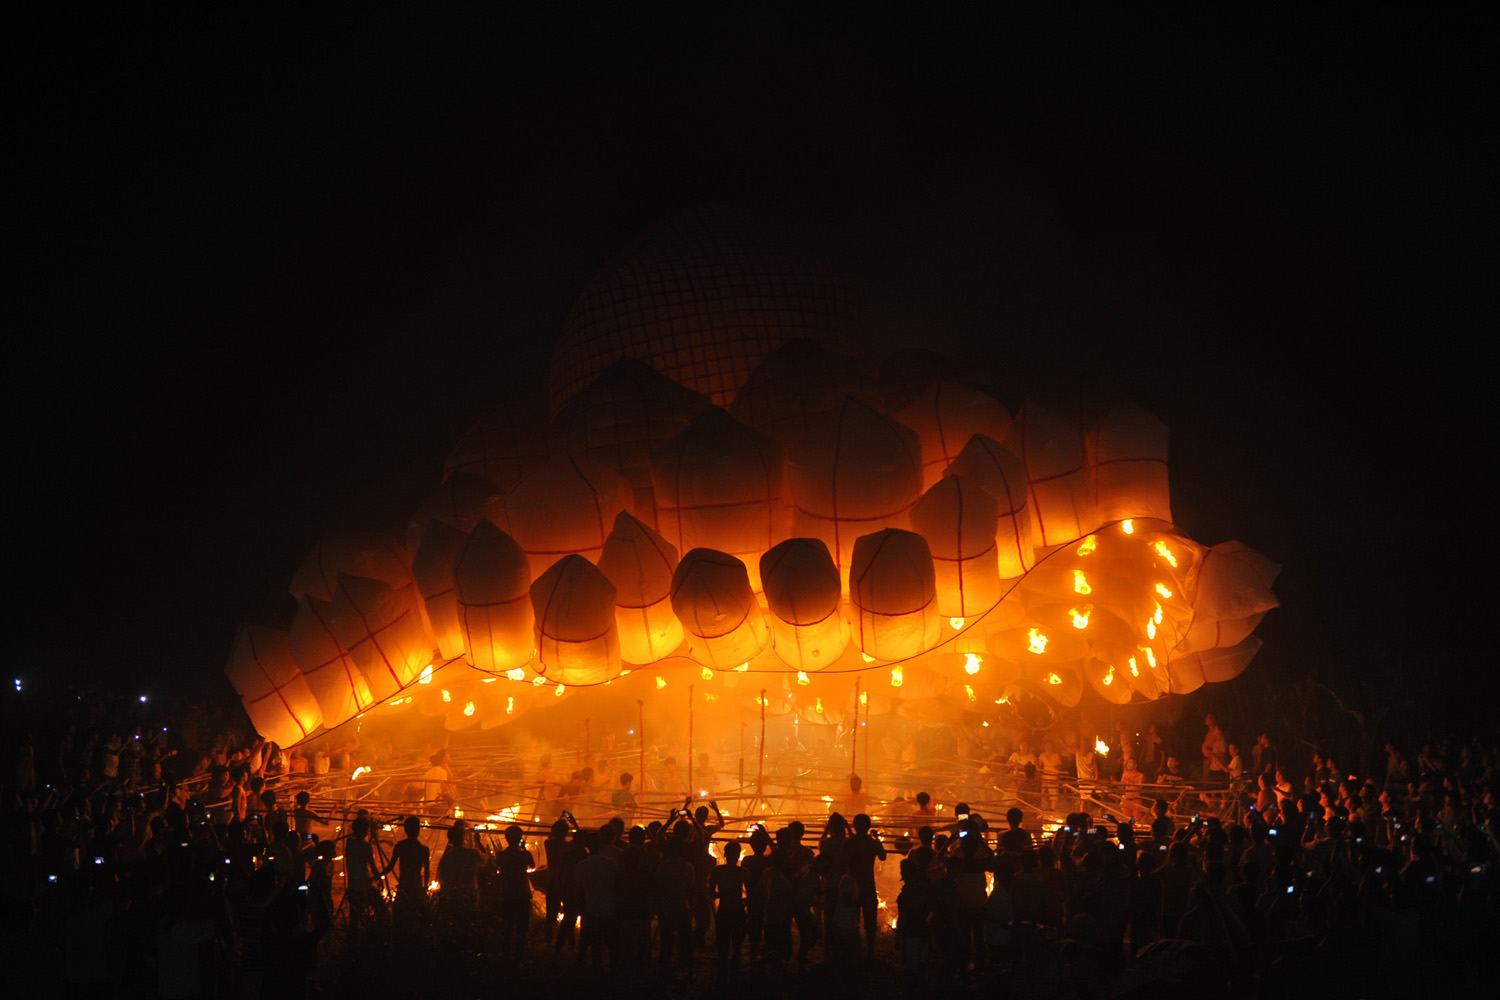 Villagers Fly Giant Lantern In Qionghai